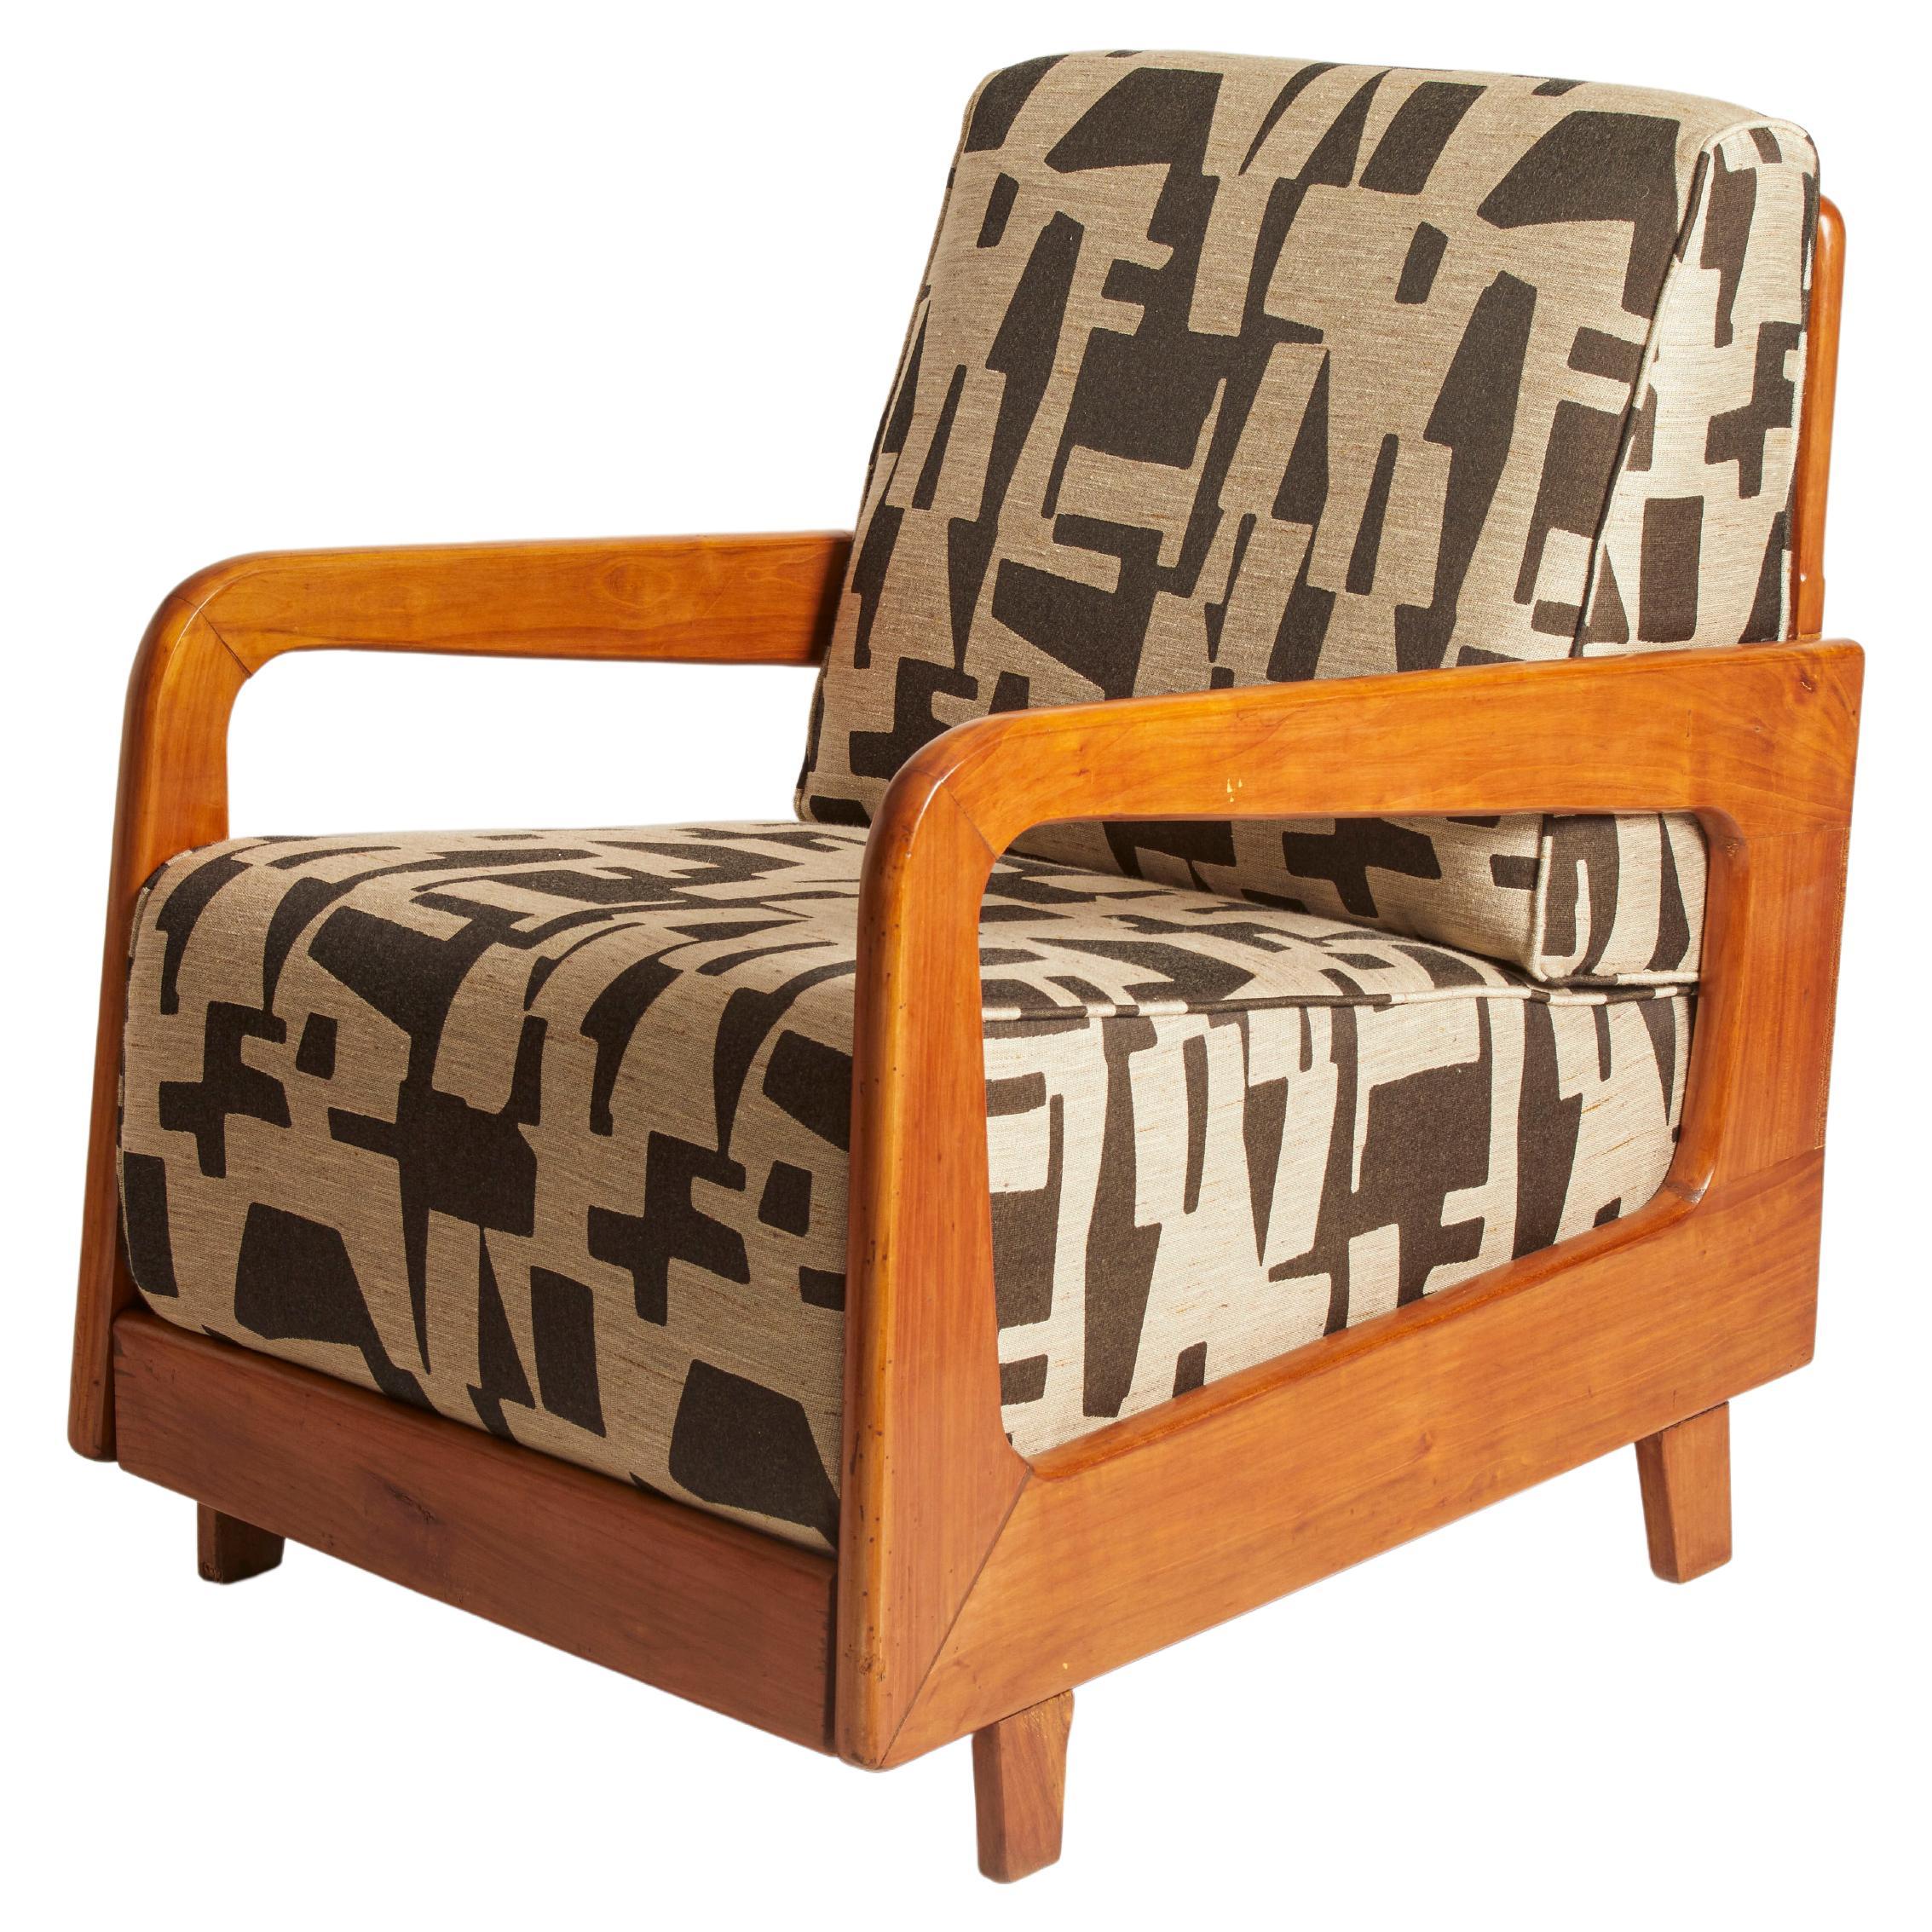 Italian 1950's Walnut Armchair Restored & Reupholstered in Jacquard Fabric For Sale